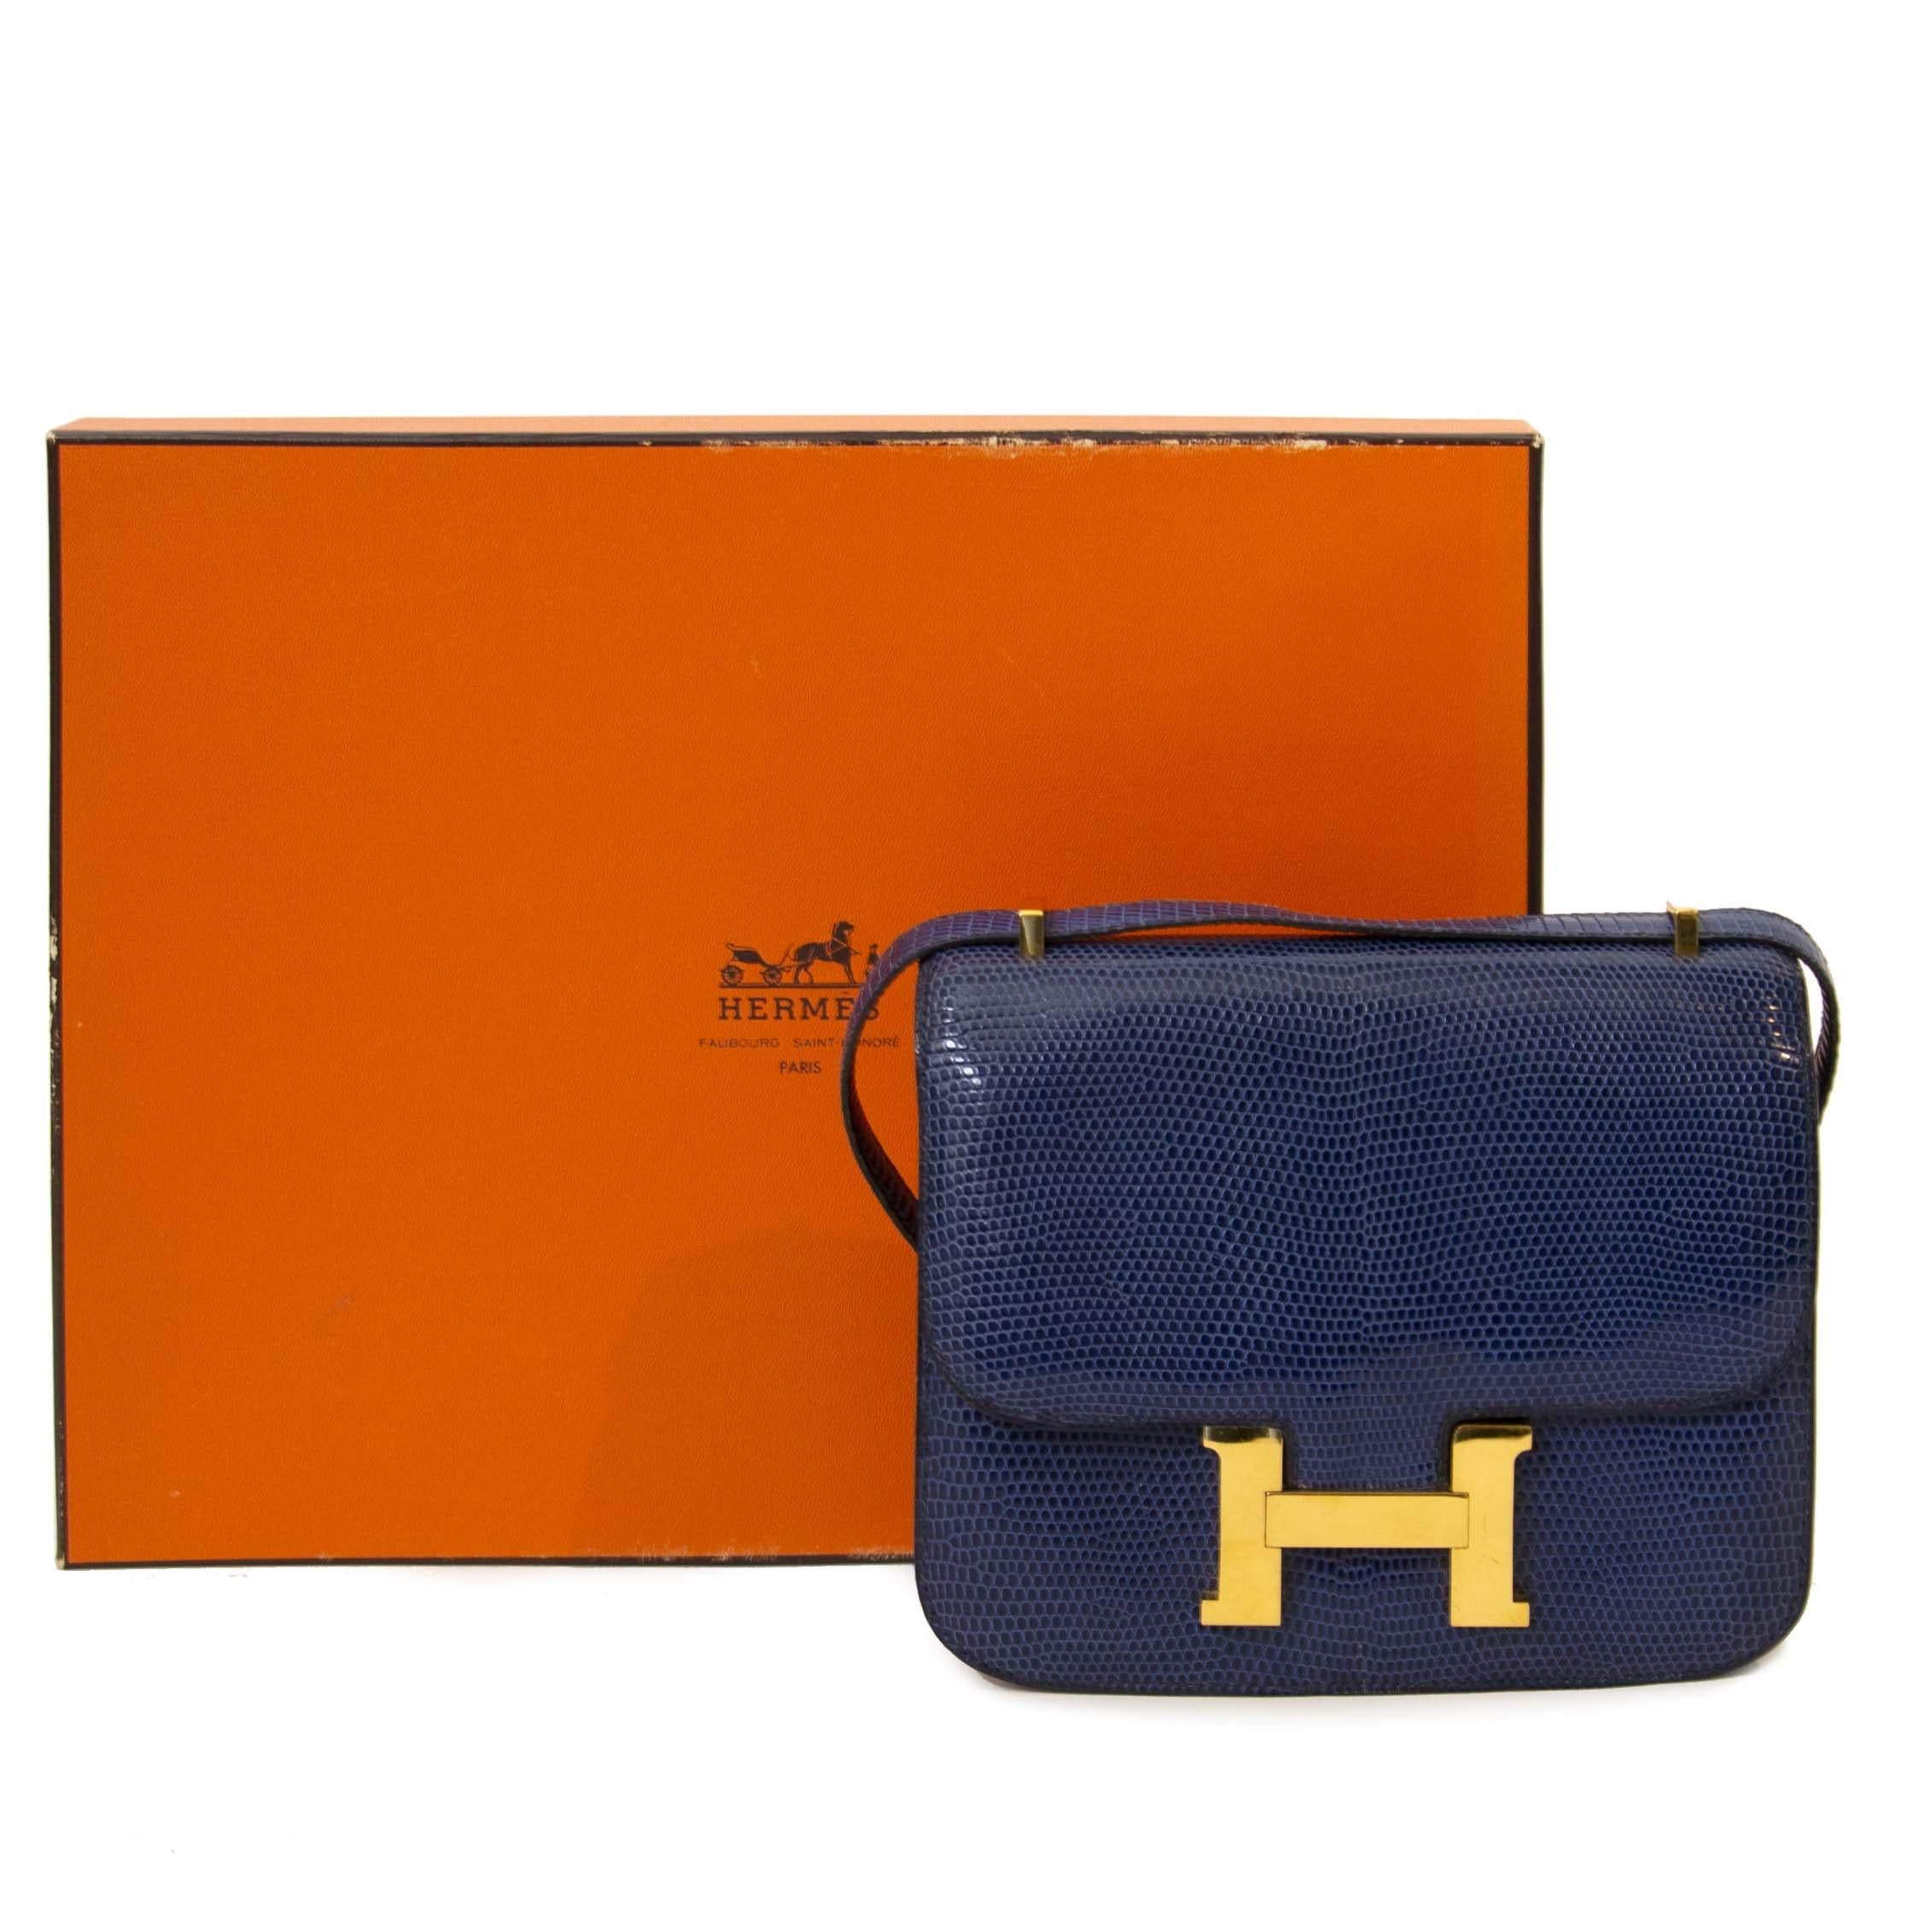 COLLECTOR'S ITEM

Hermès Constance 18 Lezard Bleu Saphir GHW

This exceptional piece by Hermès dates back from 1989 and is a true beauty! The gorgeous dark blue hue of the Lizard skin in combination with the warm gold-toned hardware make this an